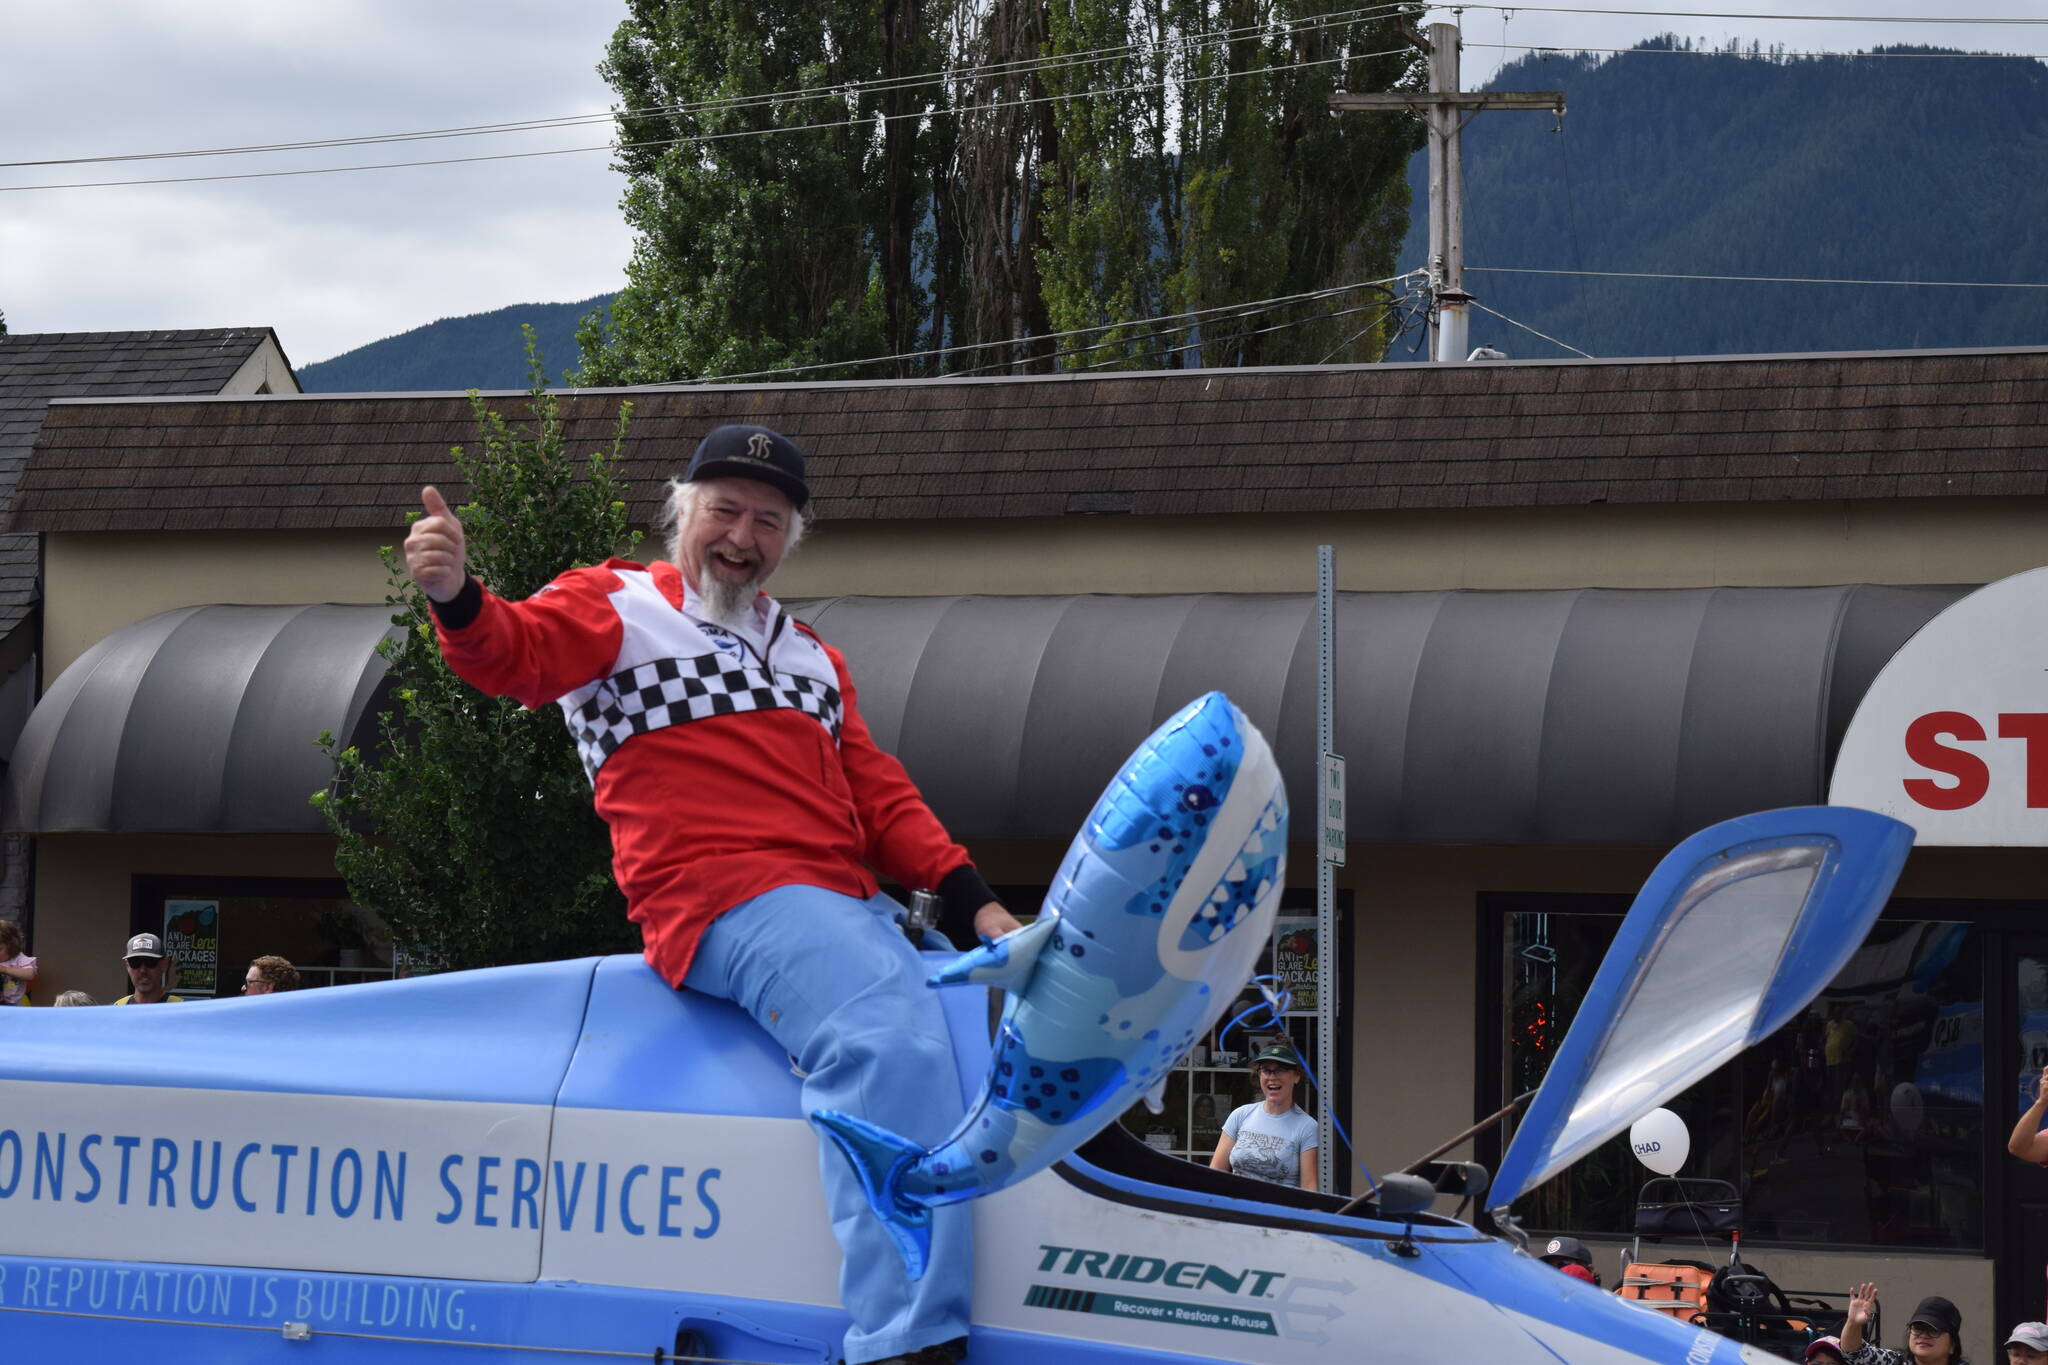 A man gives a thumbs up to the crowd during the Festival at Mt. Si Parade. Photo Conor Wilson/Valley Record.